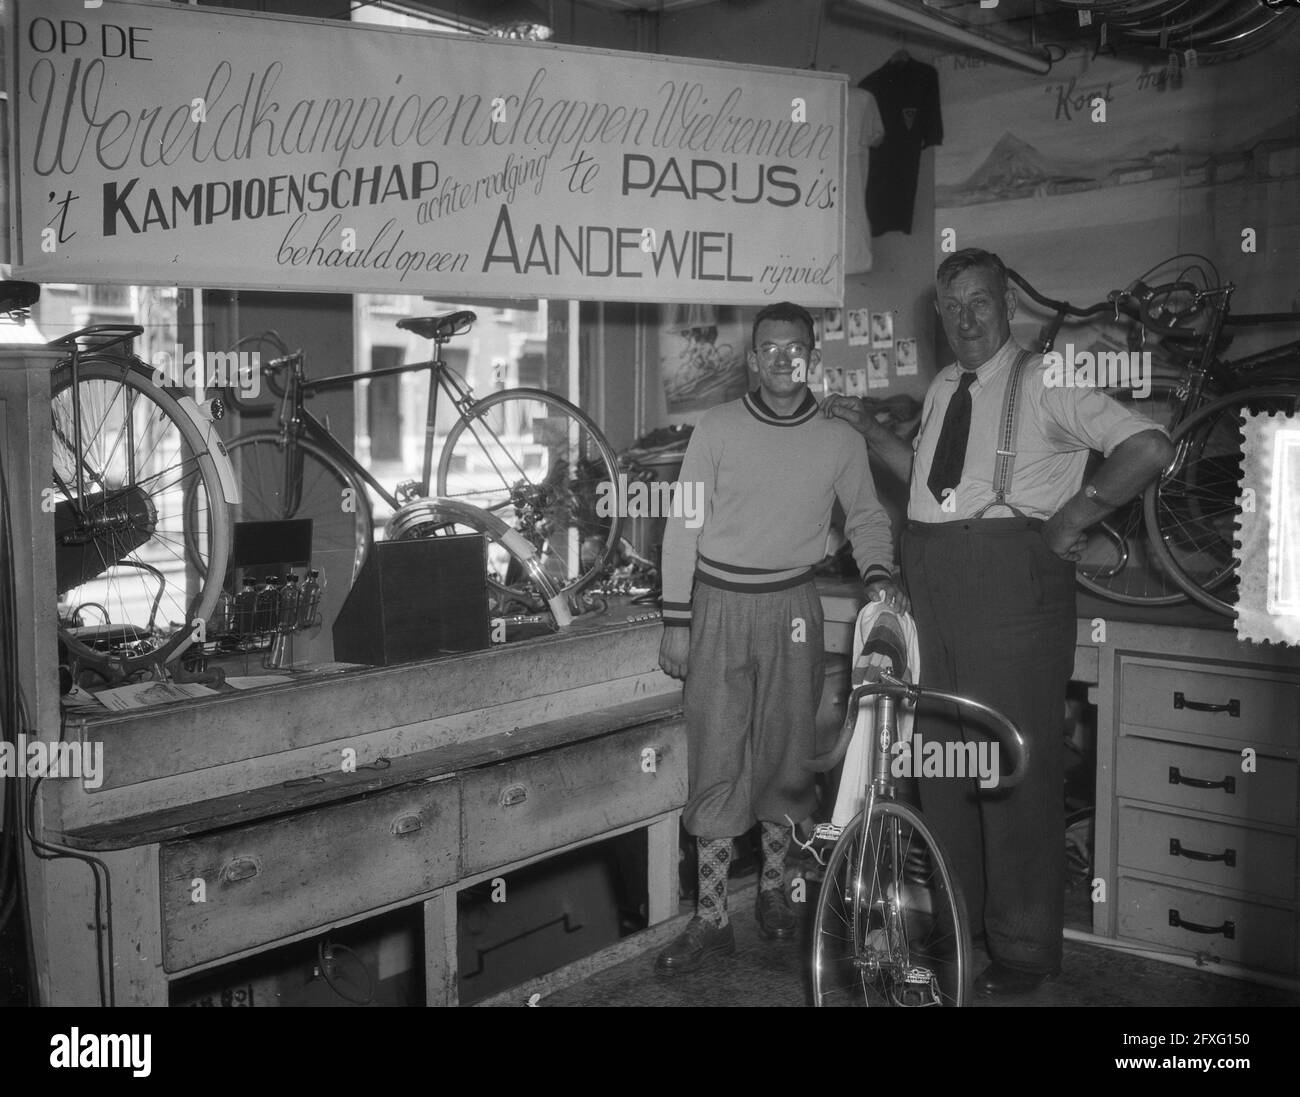 Van Heusden with tandem wheel in the case, September 1, 1952, racing bicycles, The Netherlands, 20th century press agency photo, news to remember, documentary, historic photography 1945-1990, visual stories, human history of the Twentieth Century, capturing moments in time Stock Photo